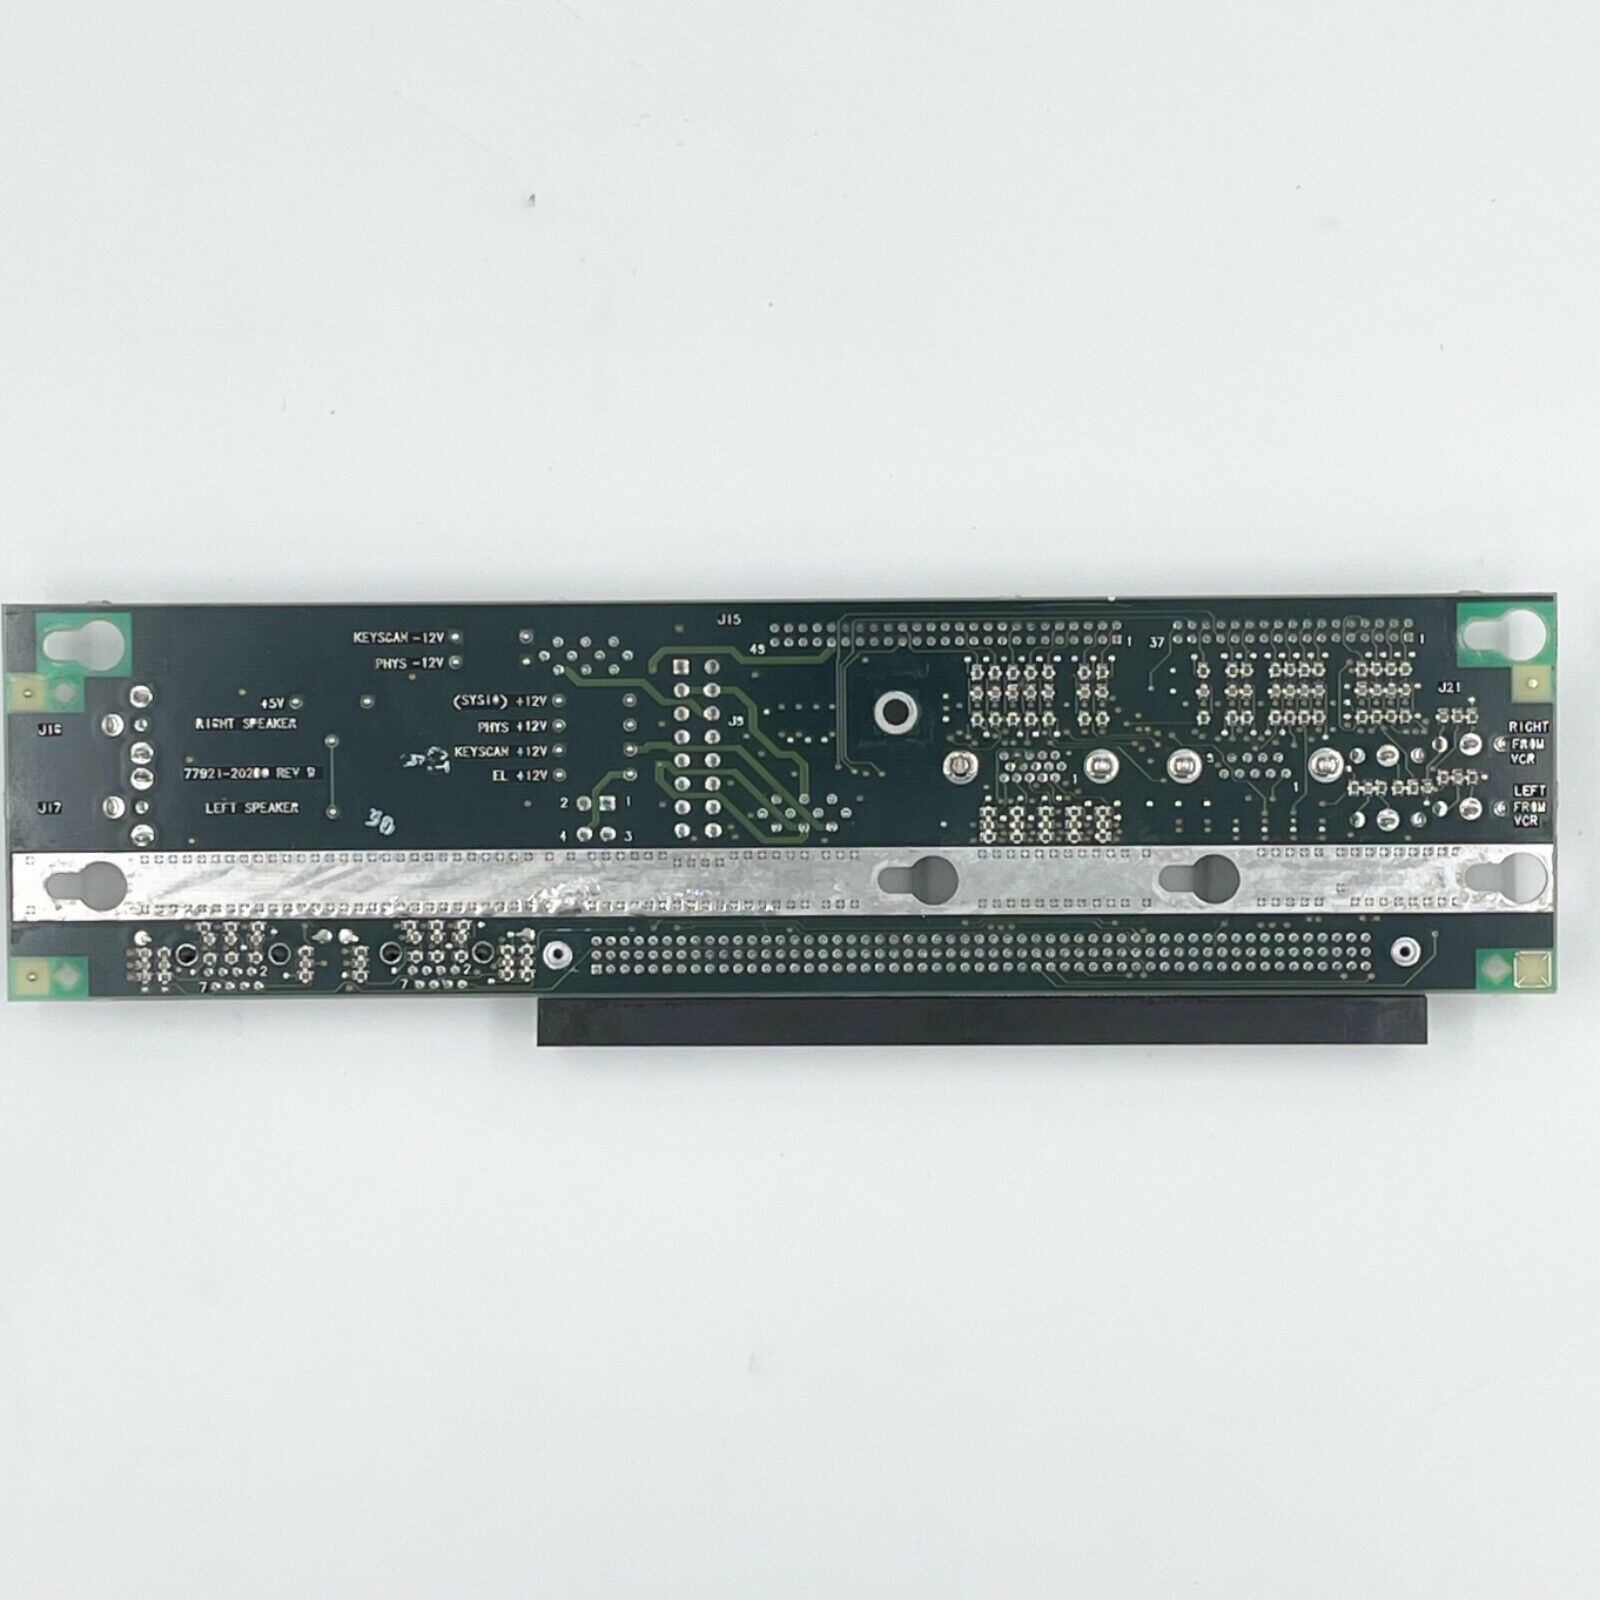 HP Philips Healthcare B77921-60200 Main I/O PCB Board for Sonos Ultrasound DIAGNOSTIC ULTRASOUND MACHINES FOR SALE